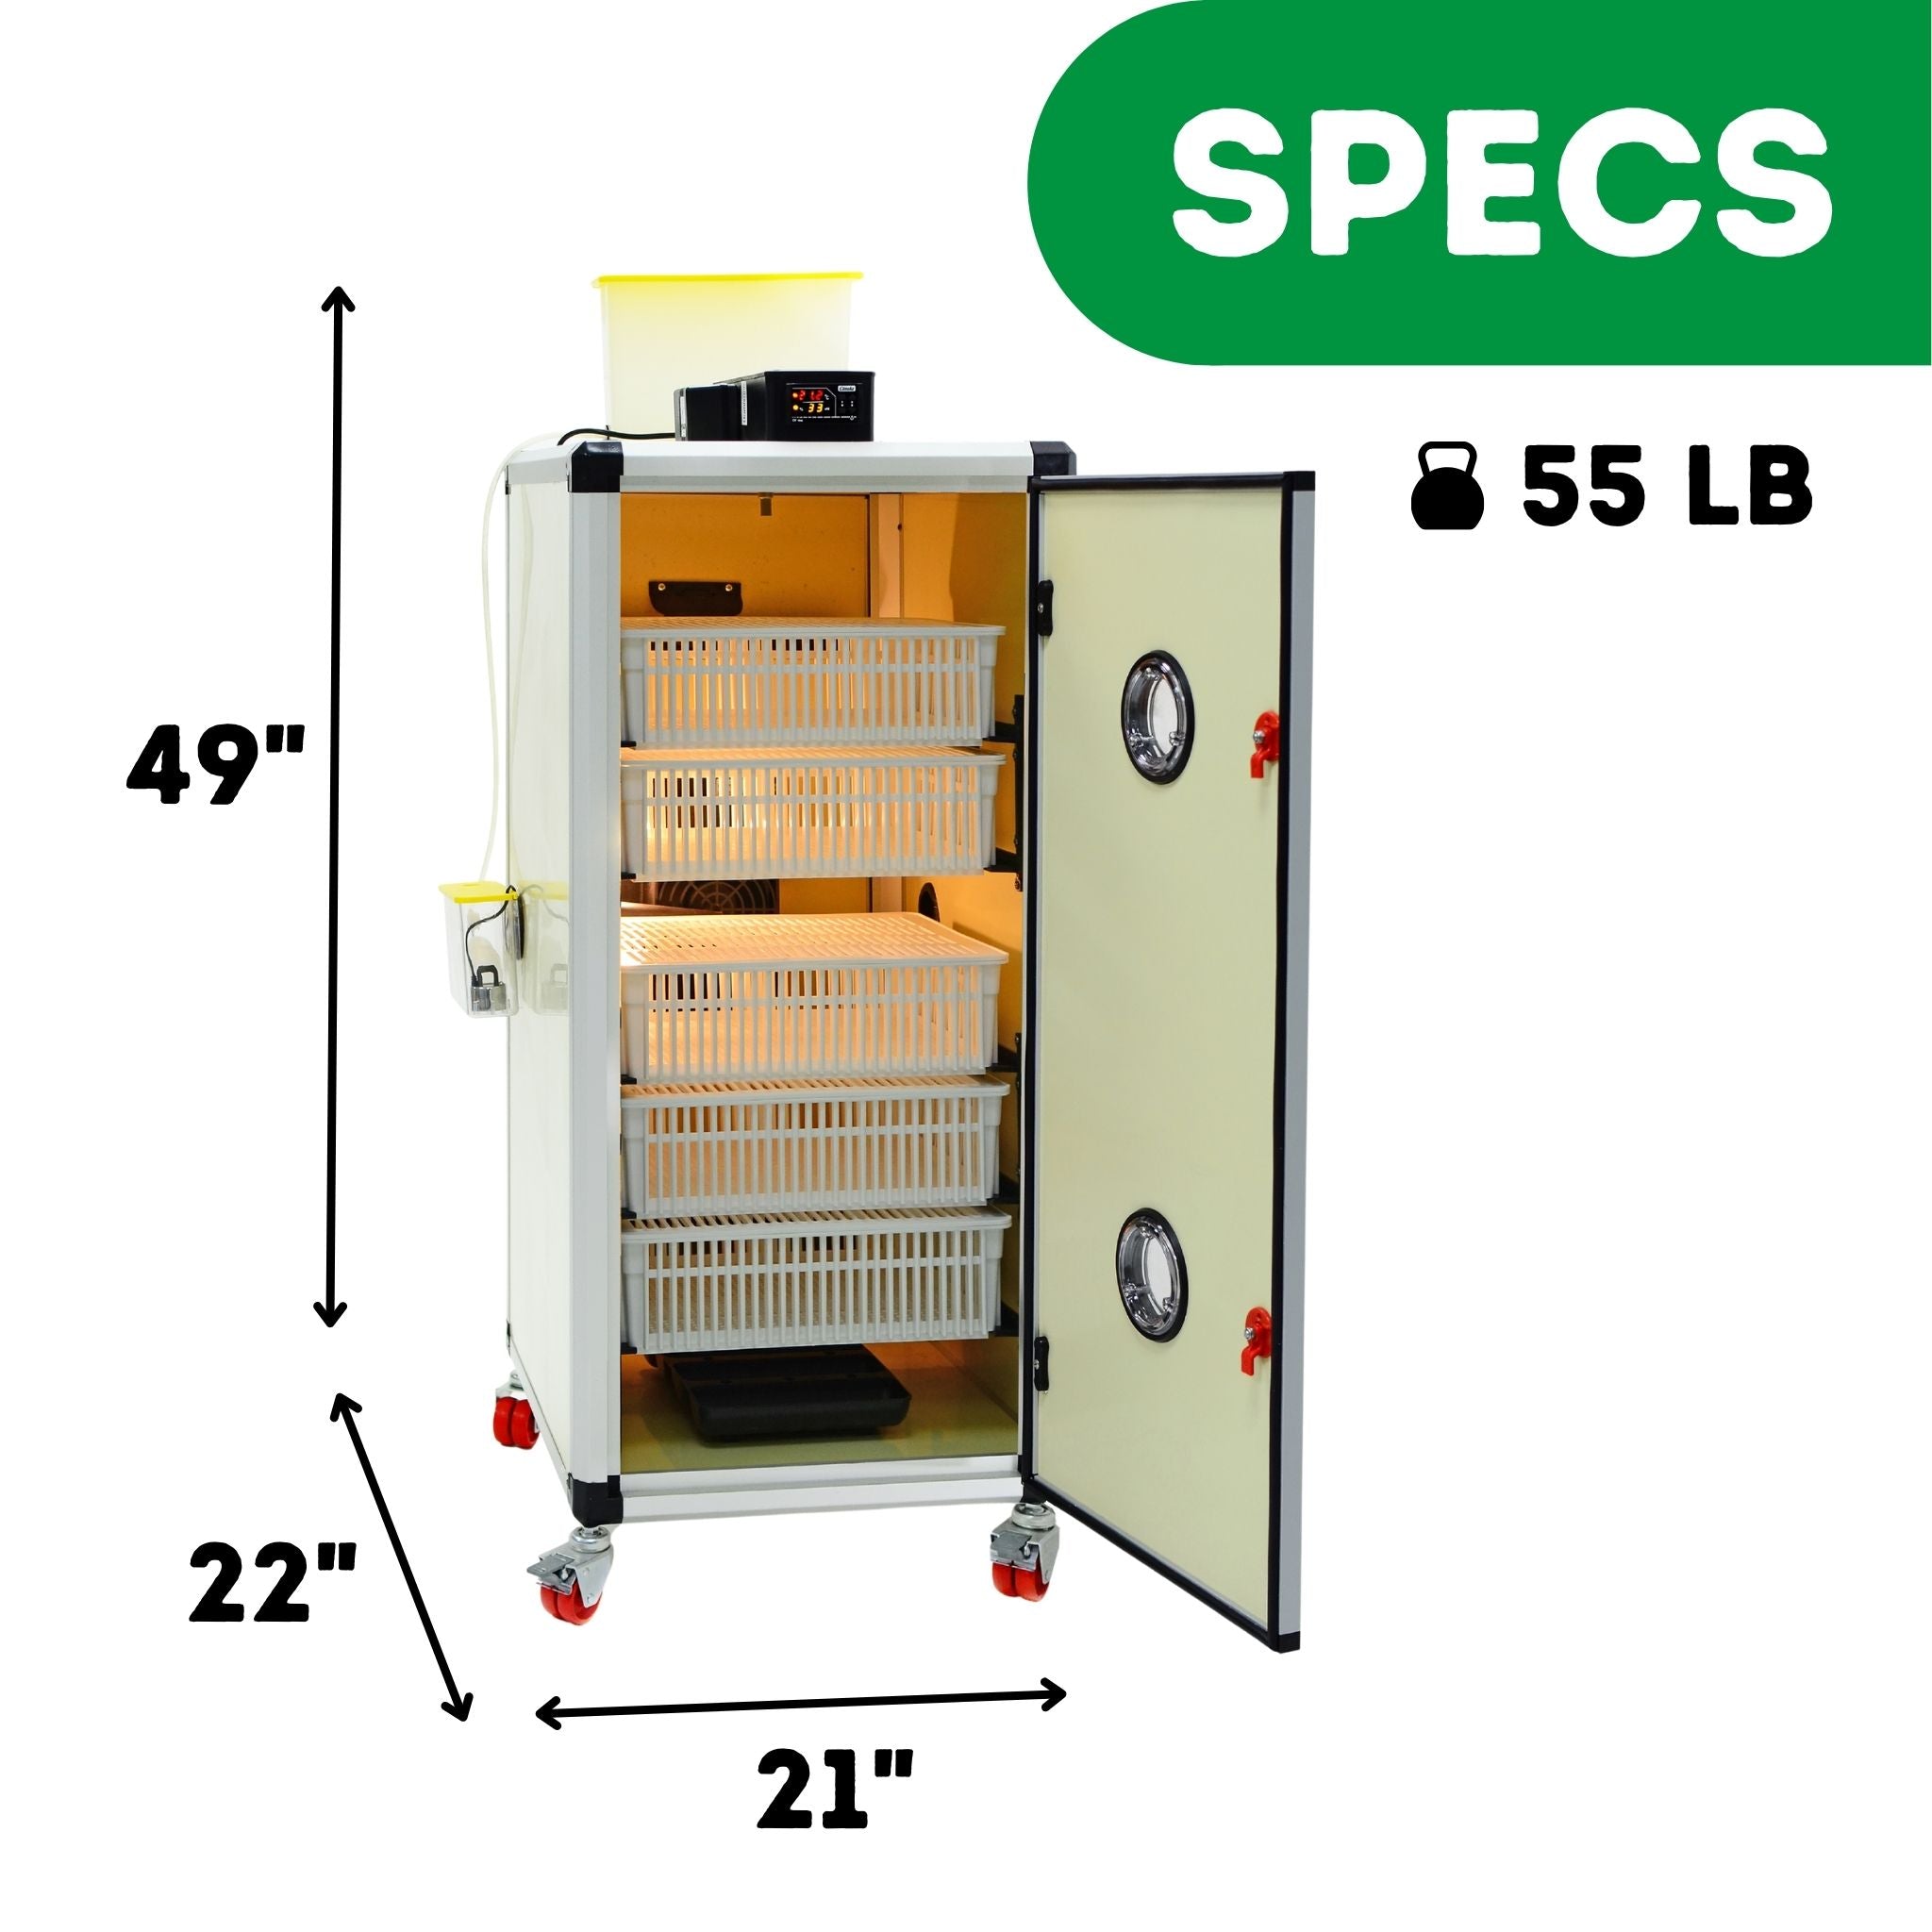 Hatching Time Cimuka. Image shows height, length and depth of incubator as well as weight. 49 inches tall, 22 inches deep, 21 inches wide and 55 pounds.